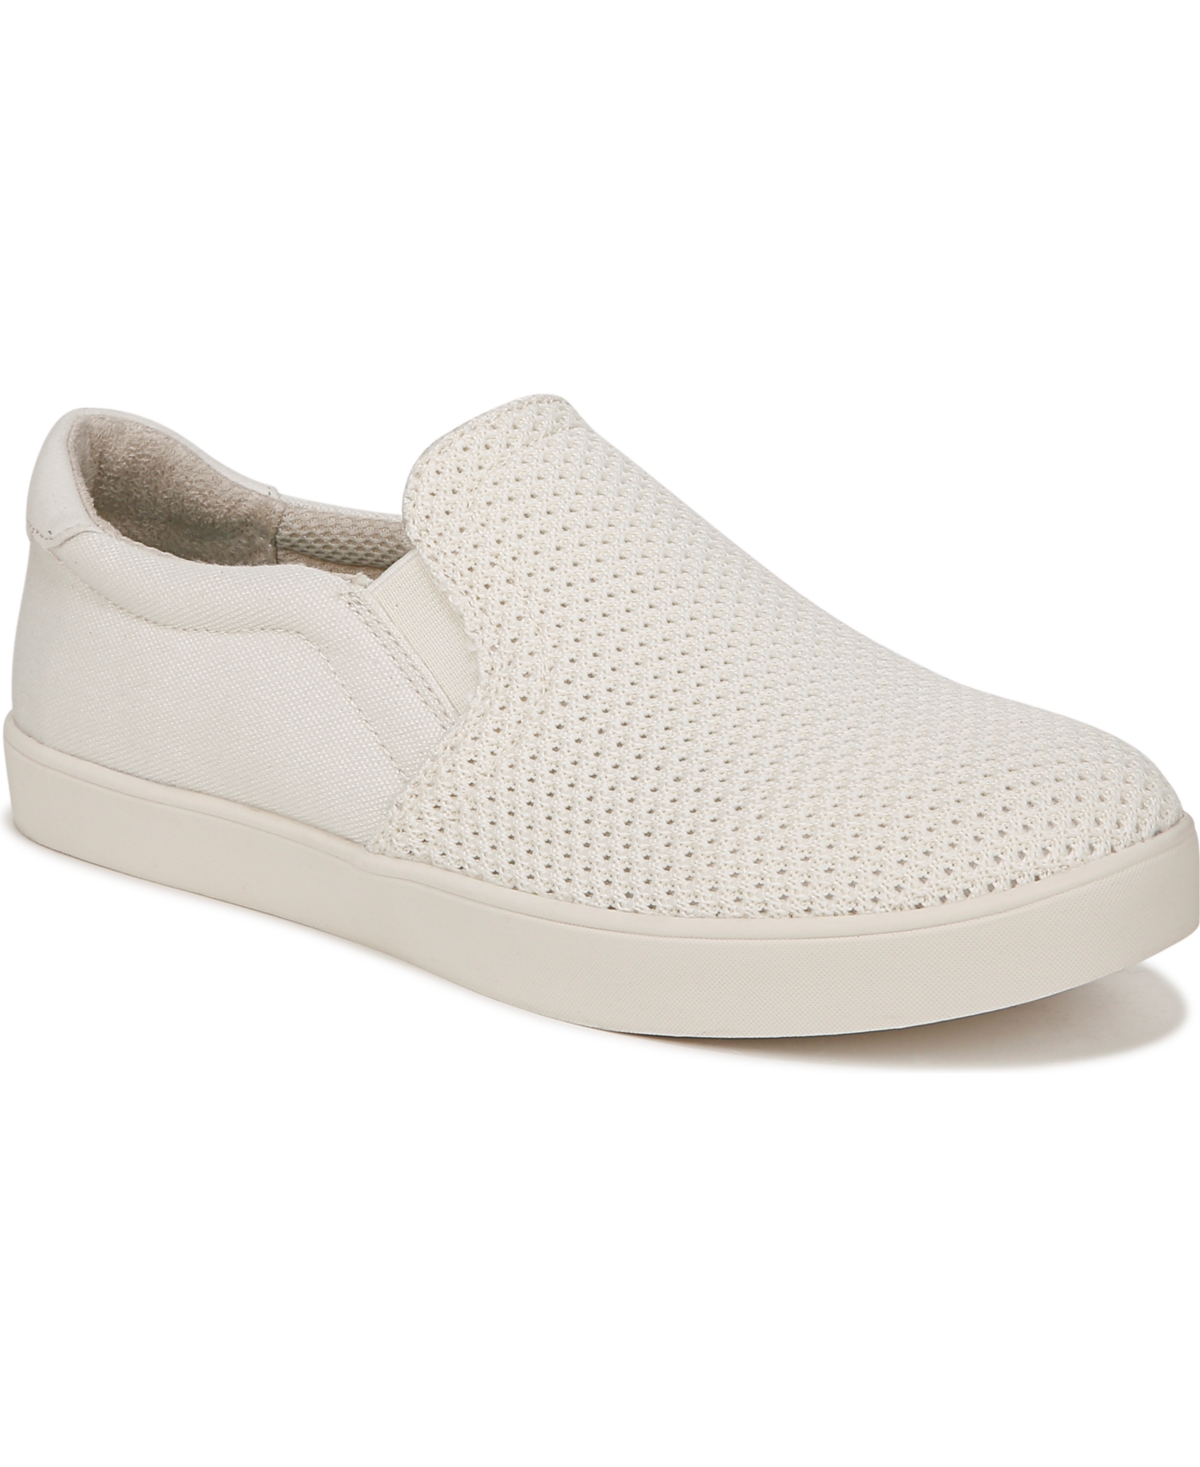 Dr. Scholl's Women's Madison Mesh Slip-on Sneakers In Off White Fabric